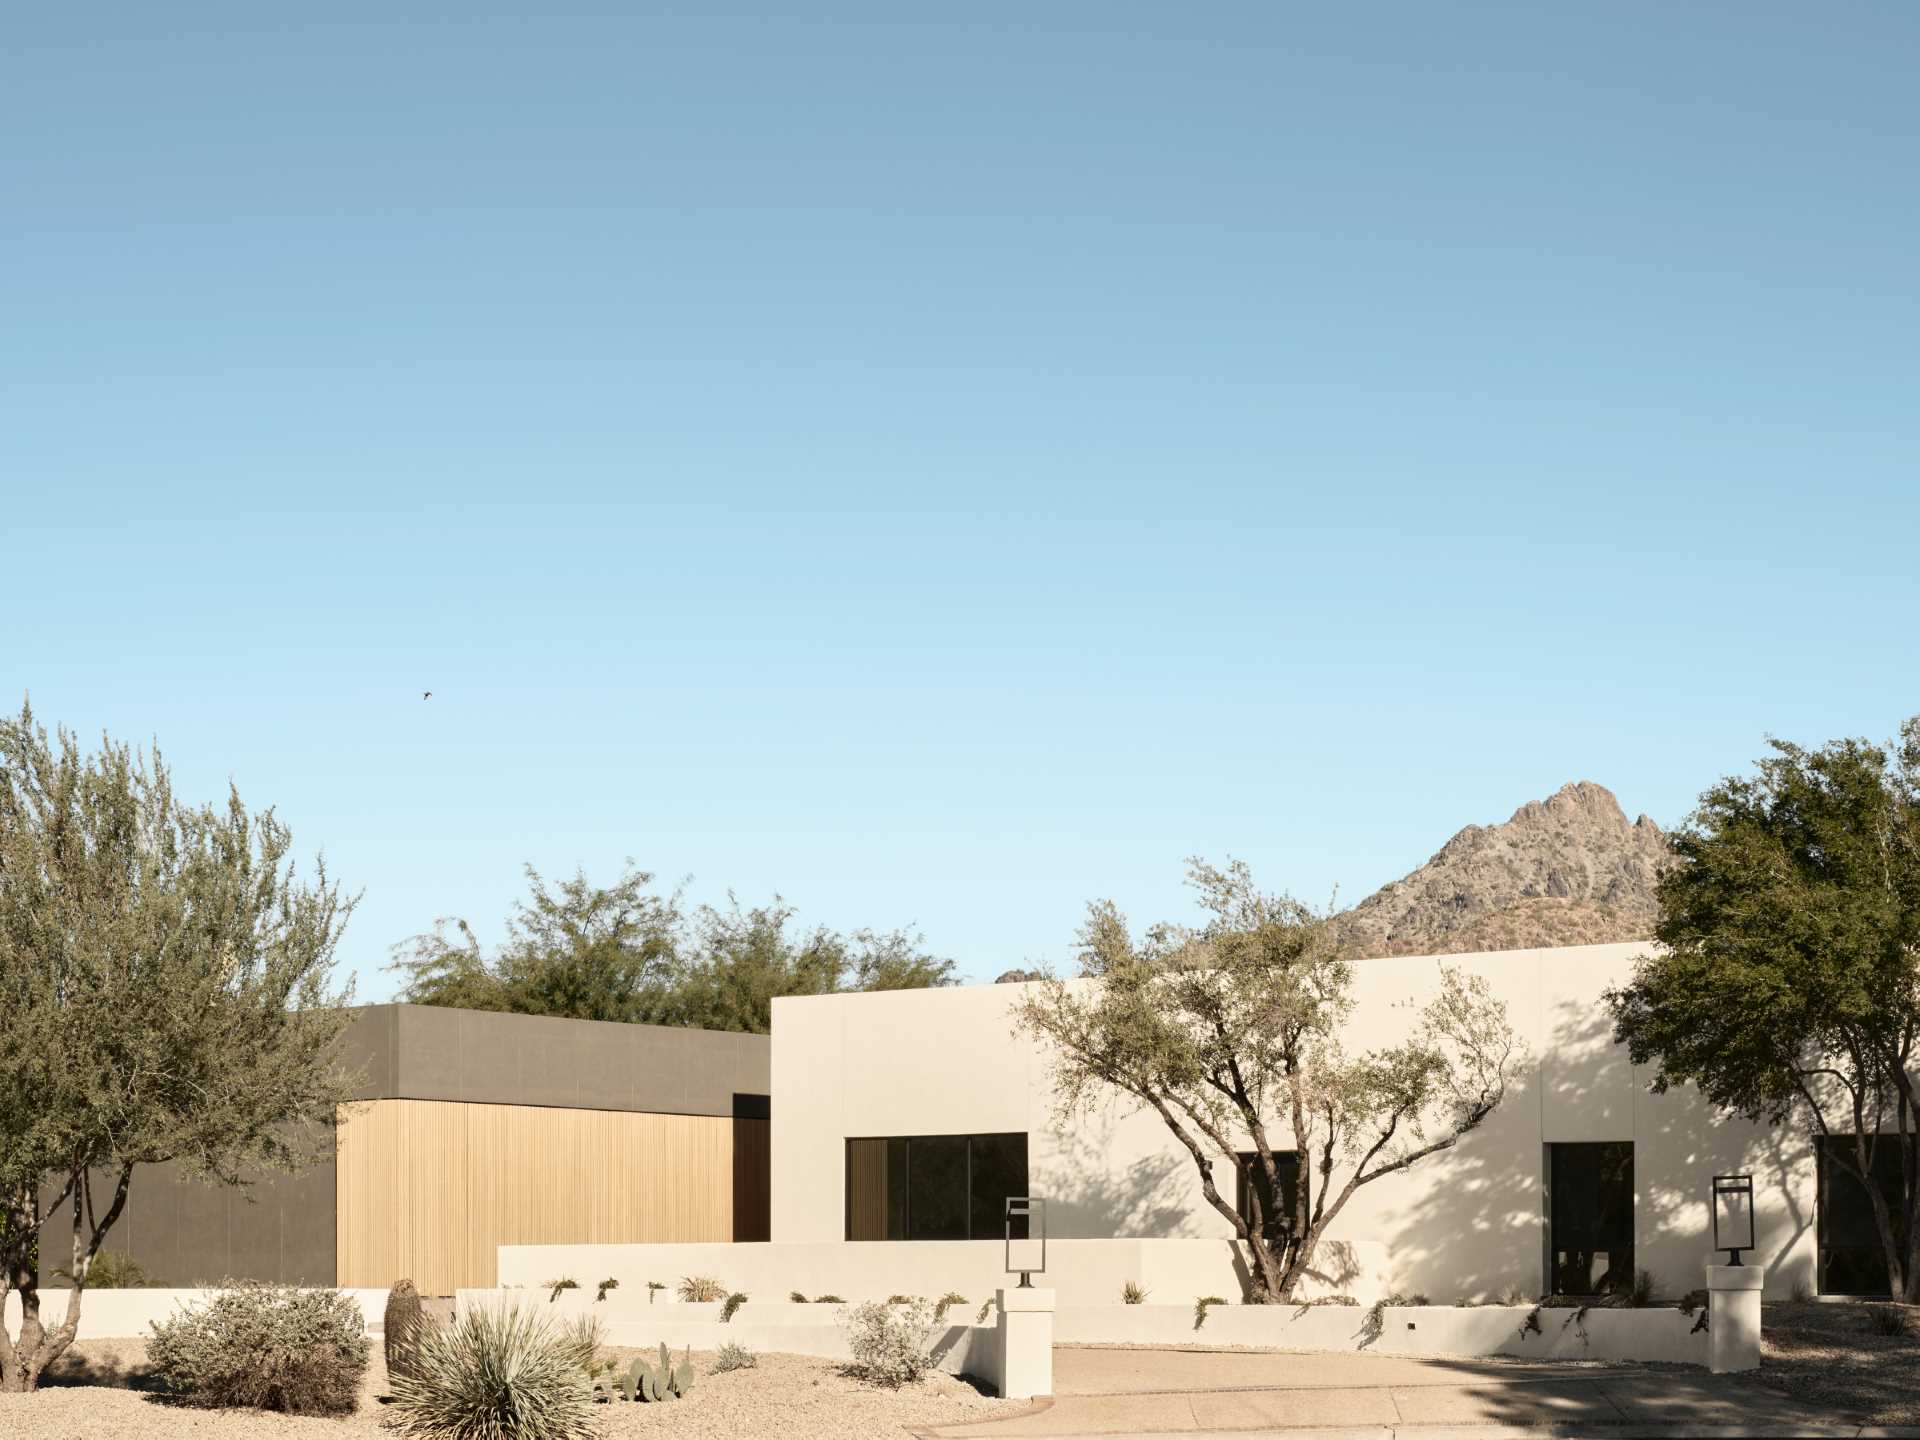 Architecture firm The Ranch Mine, has updated an existing 1970’s house in Paradise Valley, Arizona, and transformed it into a modern home with ample light.